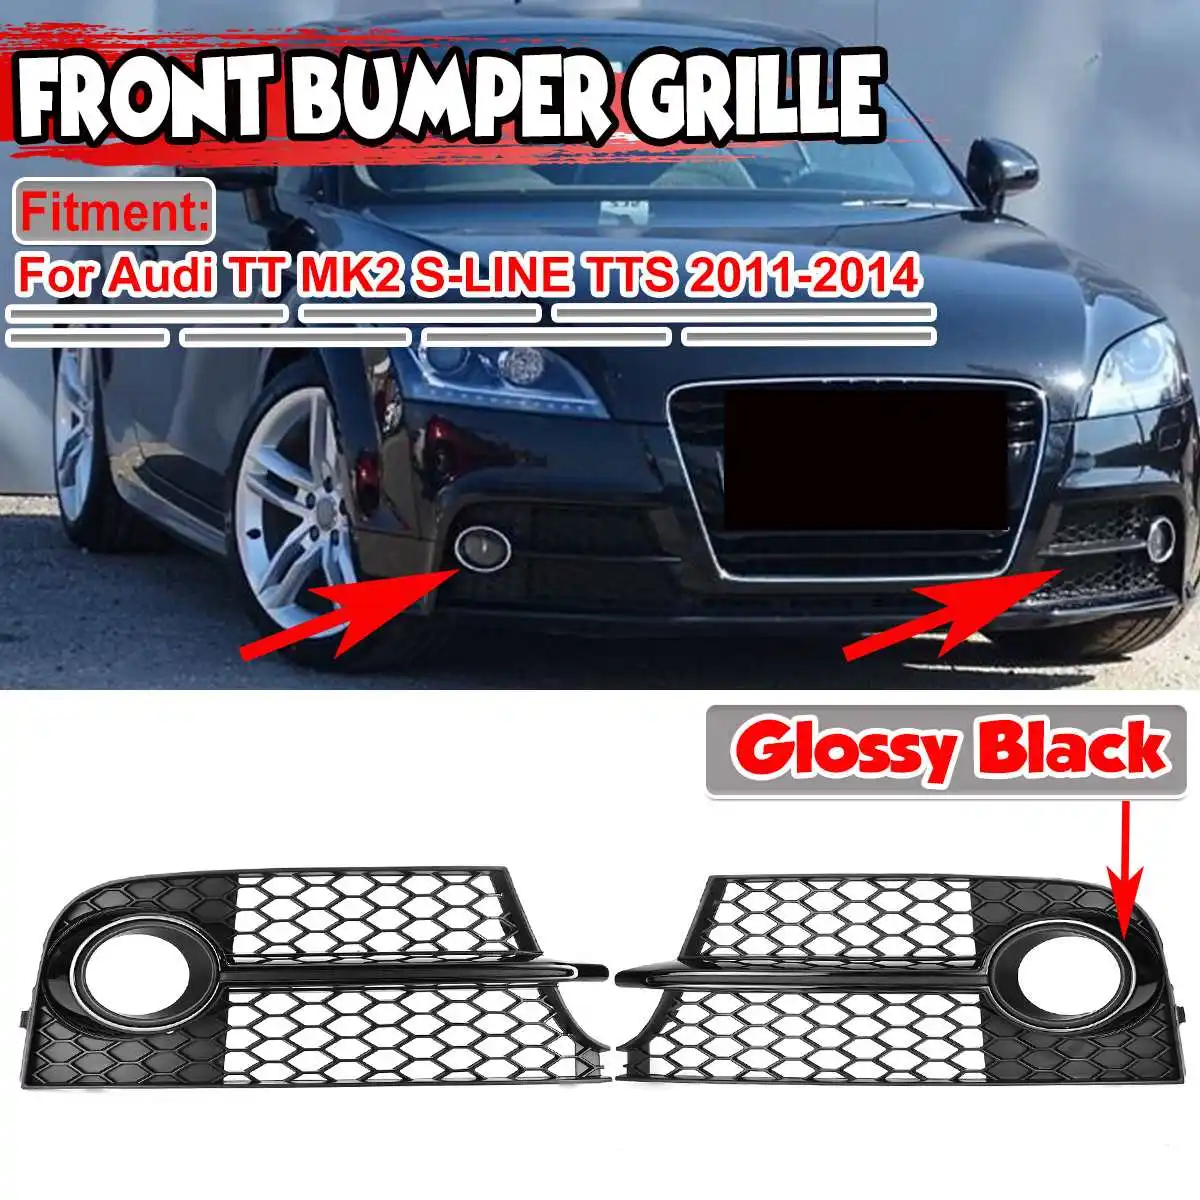 Black / Silver 2pcs Car Front Fog Light Grill Grille Lamp Cover